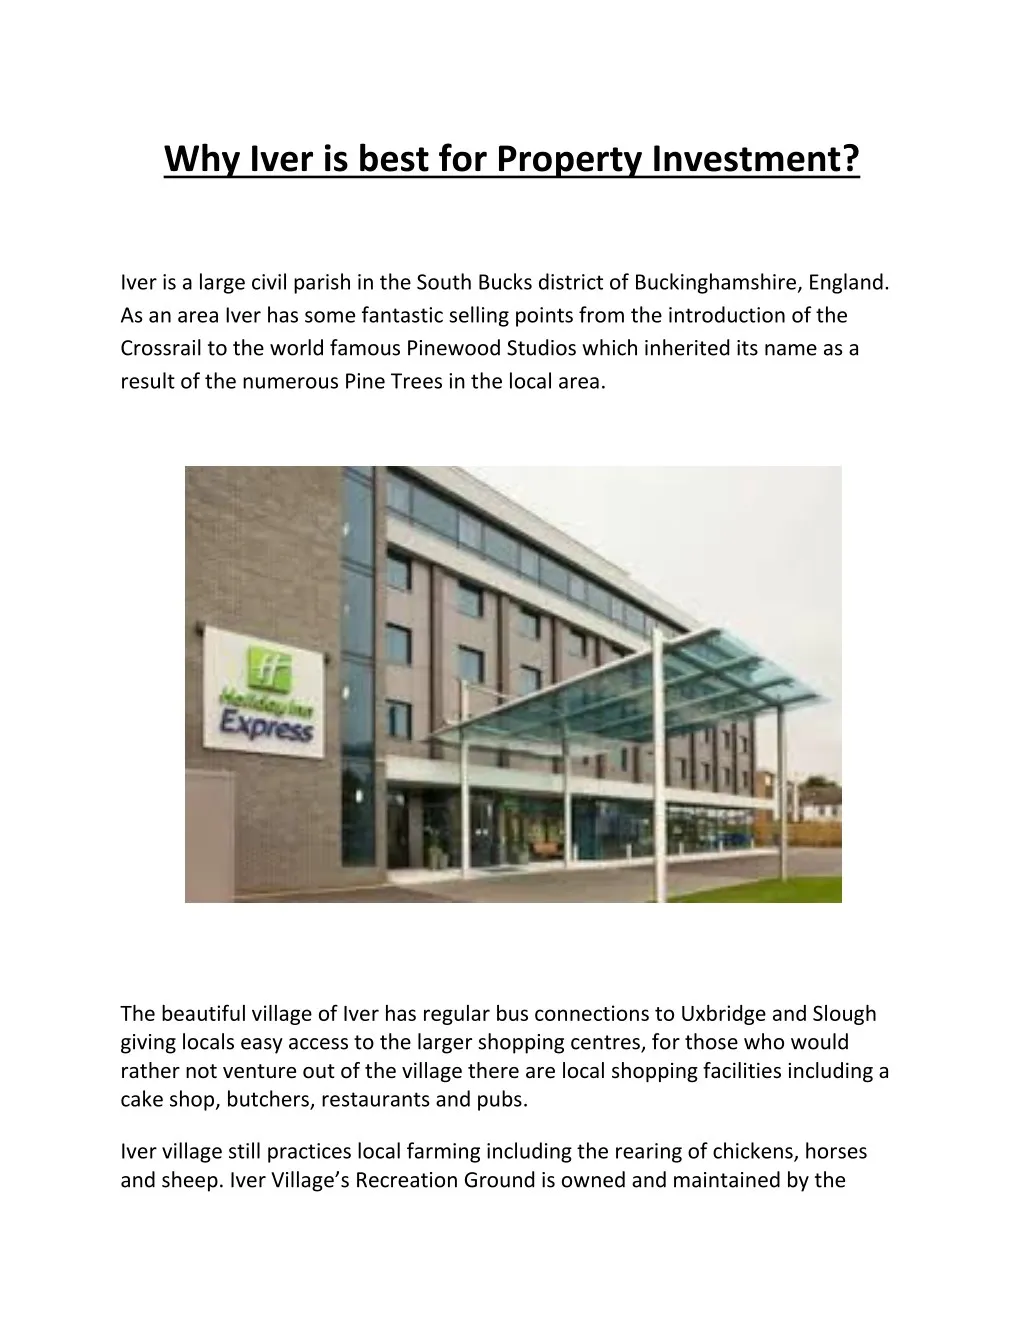 why iver is best for property investment